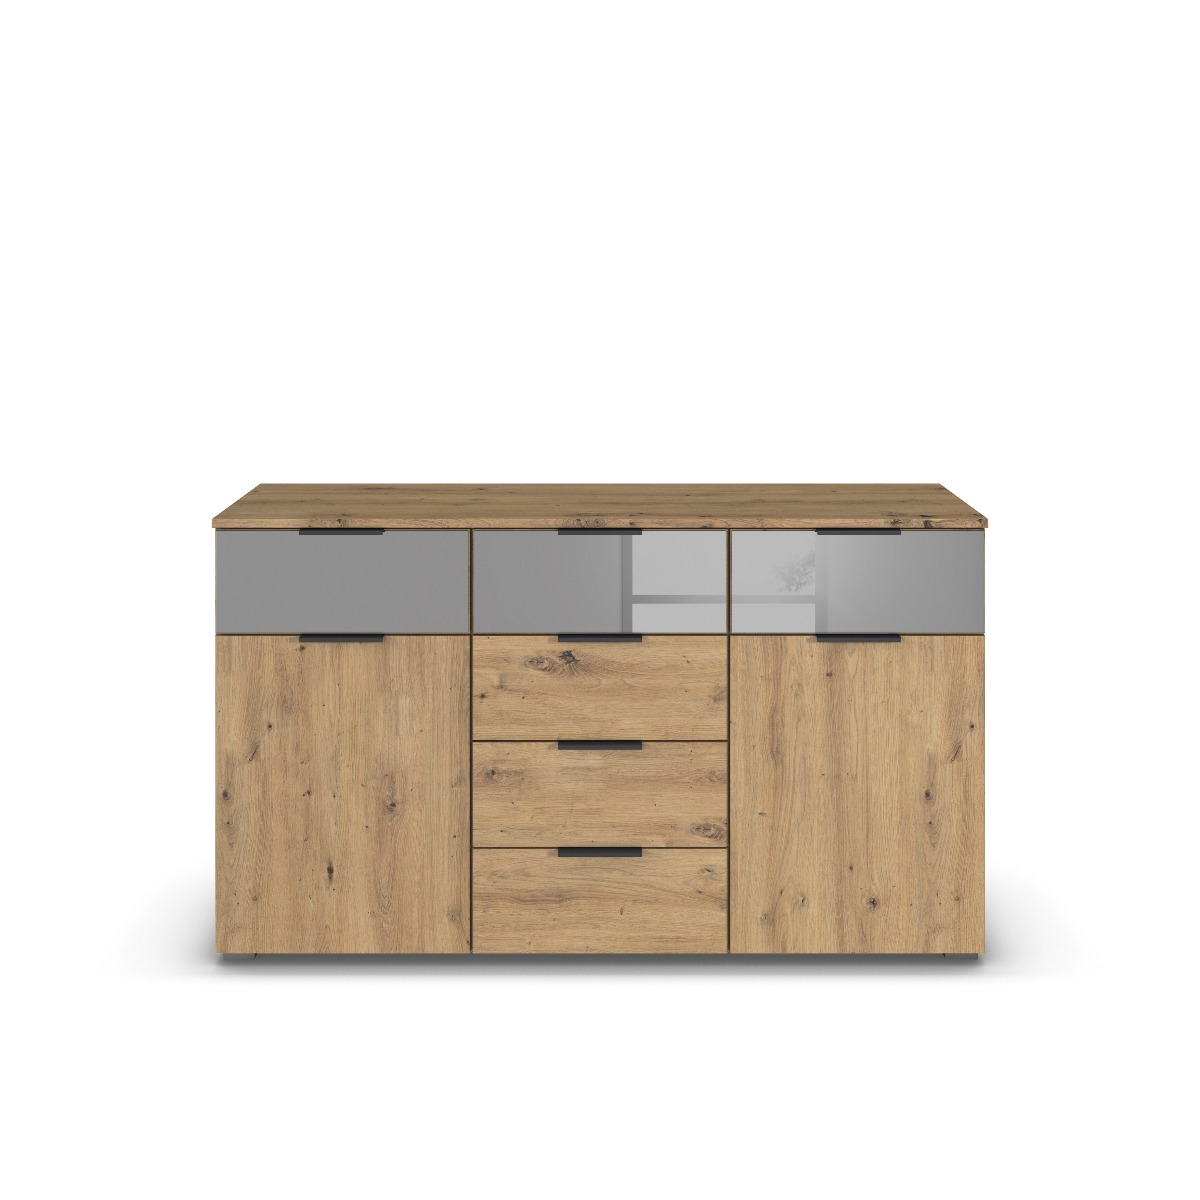 chest of drawers (2 door, 6 drawers)